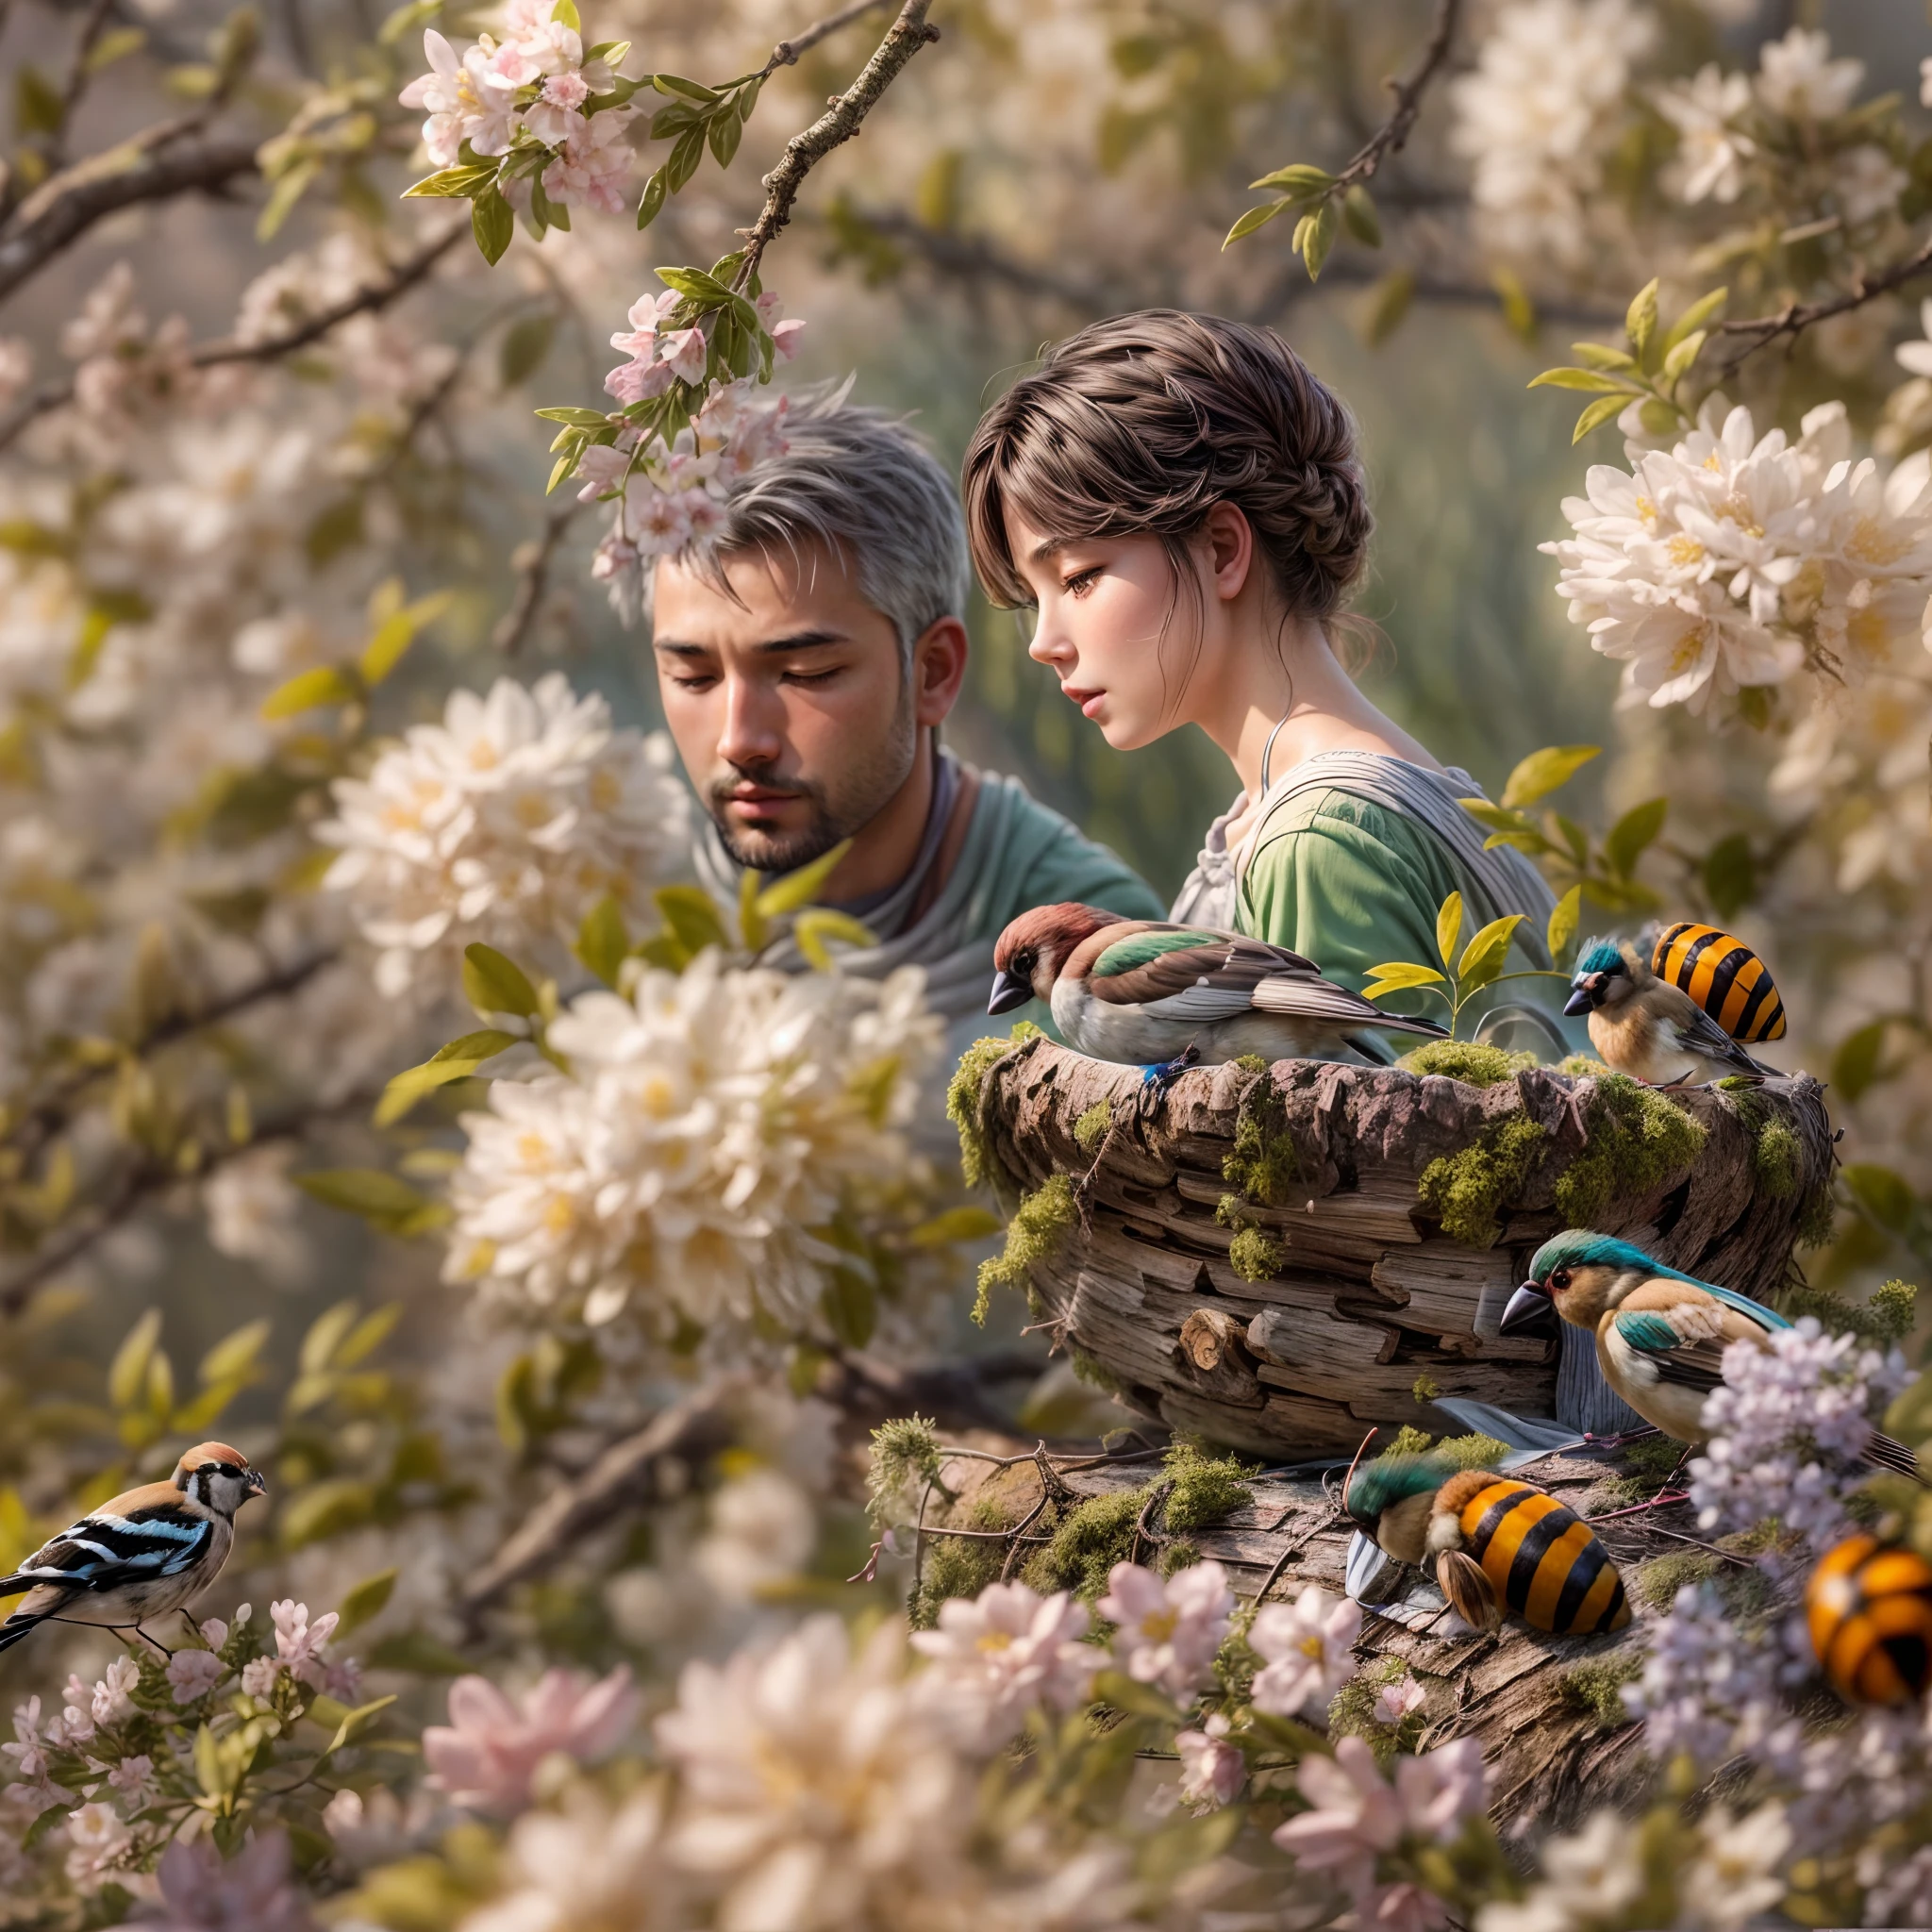 HyperdetAiled Oil pAinting, ultrAwide view, lAte spring, A (wholesome romAntic humAn couple rest in A meAdow of whitethorn bush), (lAdy bug on flower), vivAcious (bee pollinAting pinK flowers), (chAffinch wAtching scene from grey mossy nest), mAsterpiece, mAsterworK, 細緻, intimAte, nuAnced, highest quAlity, 最高保真度, 最高分辨率, 高解析度, highest detAil, hyper-detAiled, detAil enhAncement, deeply detAiled, 超高畫質, 高動態範圍, 全高清, 8K, 16K, 32K, K, cAustics, subsurfAce scAttering, High DynAmic RAnge, DynAmic Tone MApping, SpeculAr reflection, 亚像素卷积,